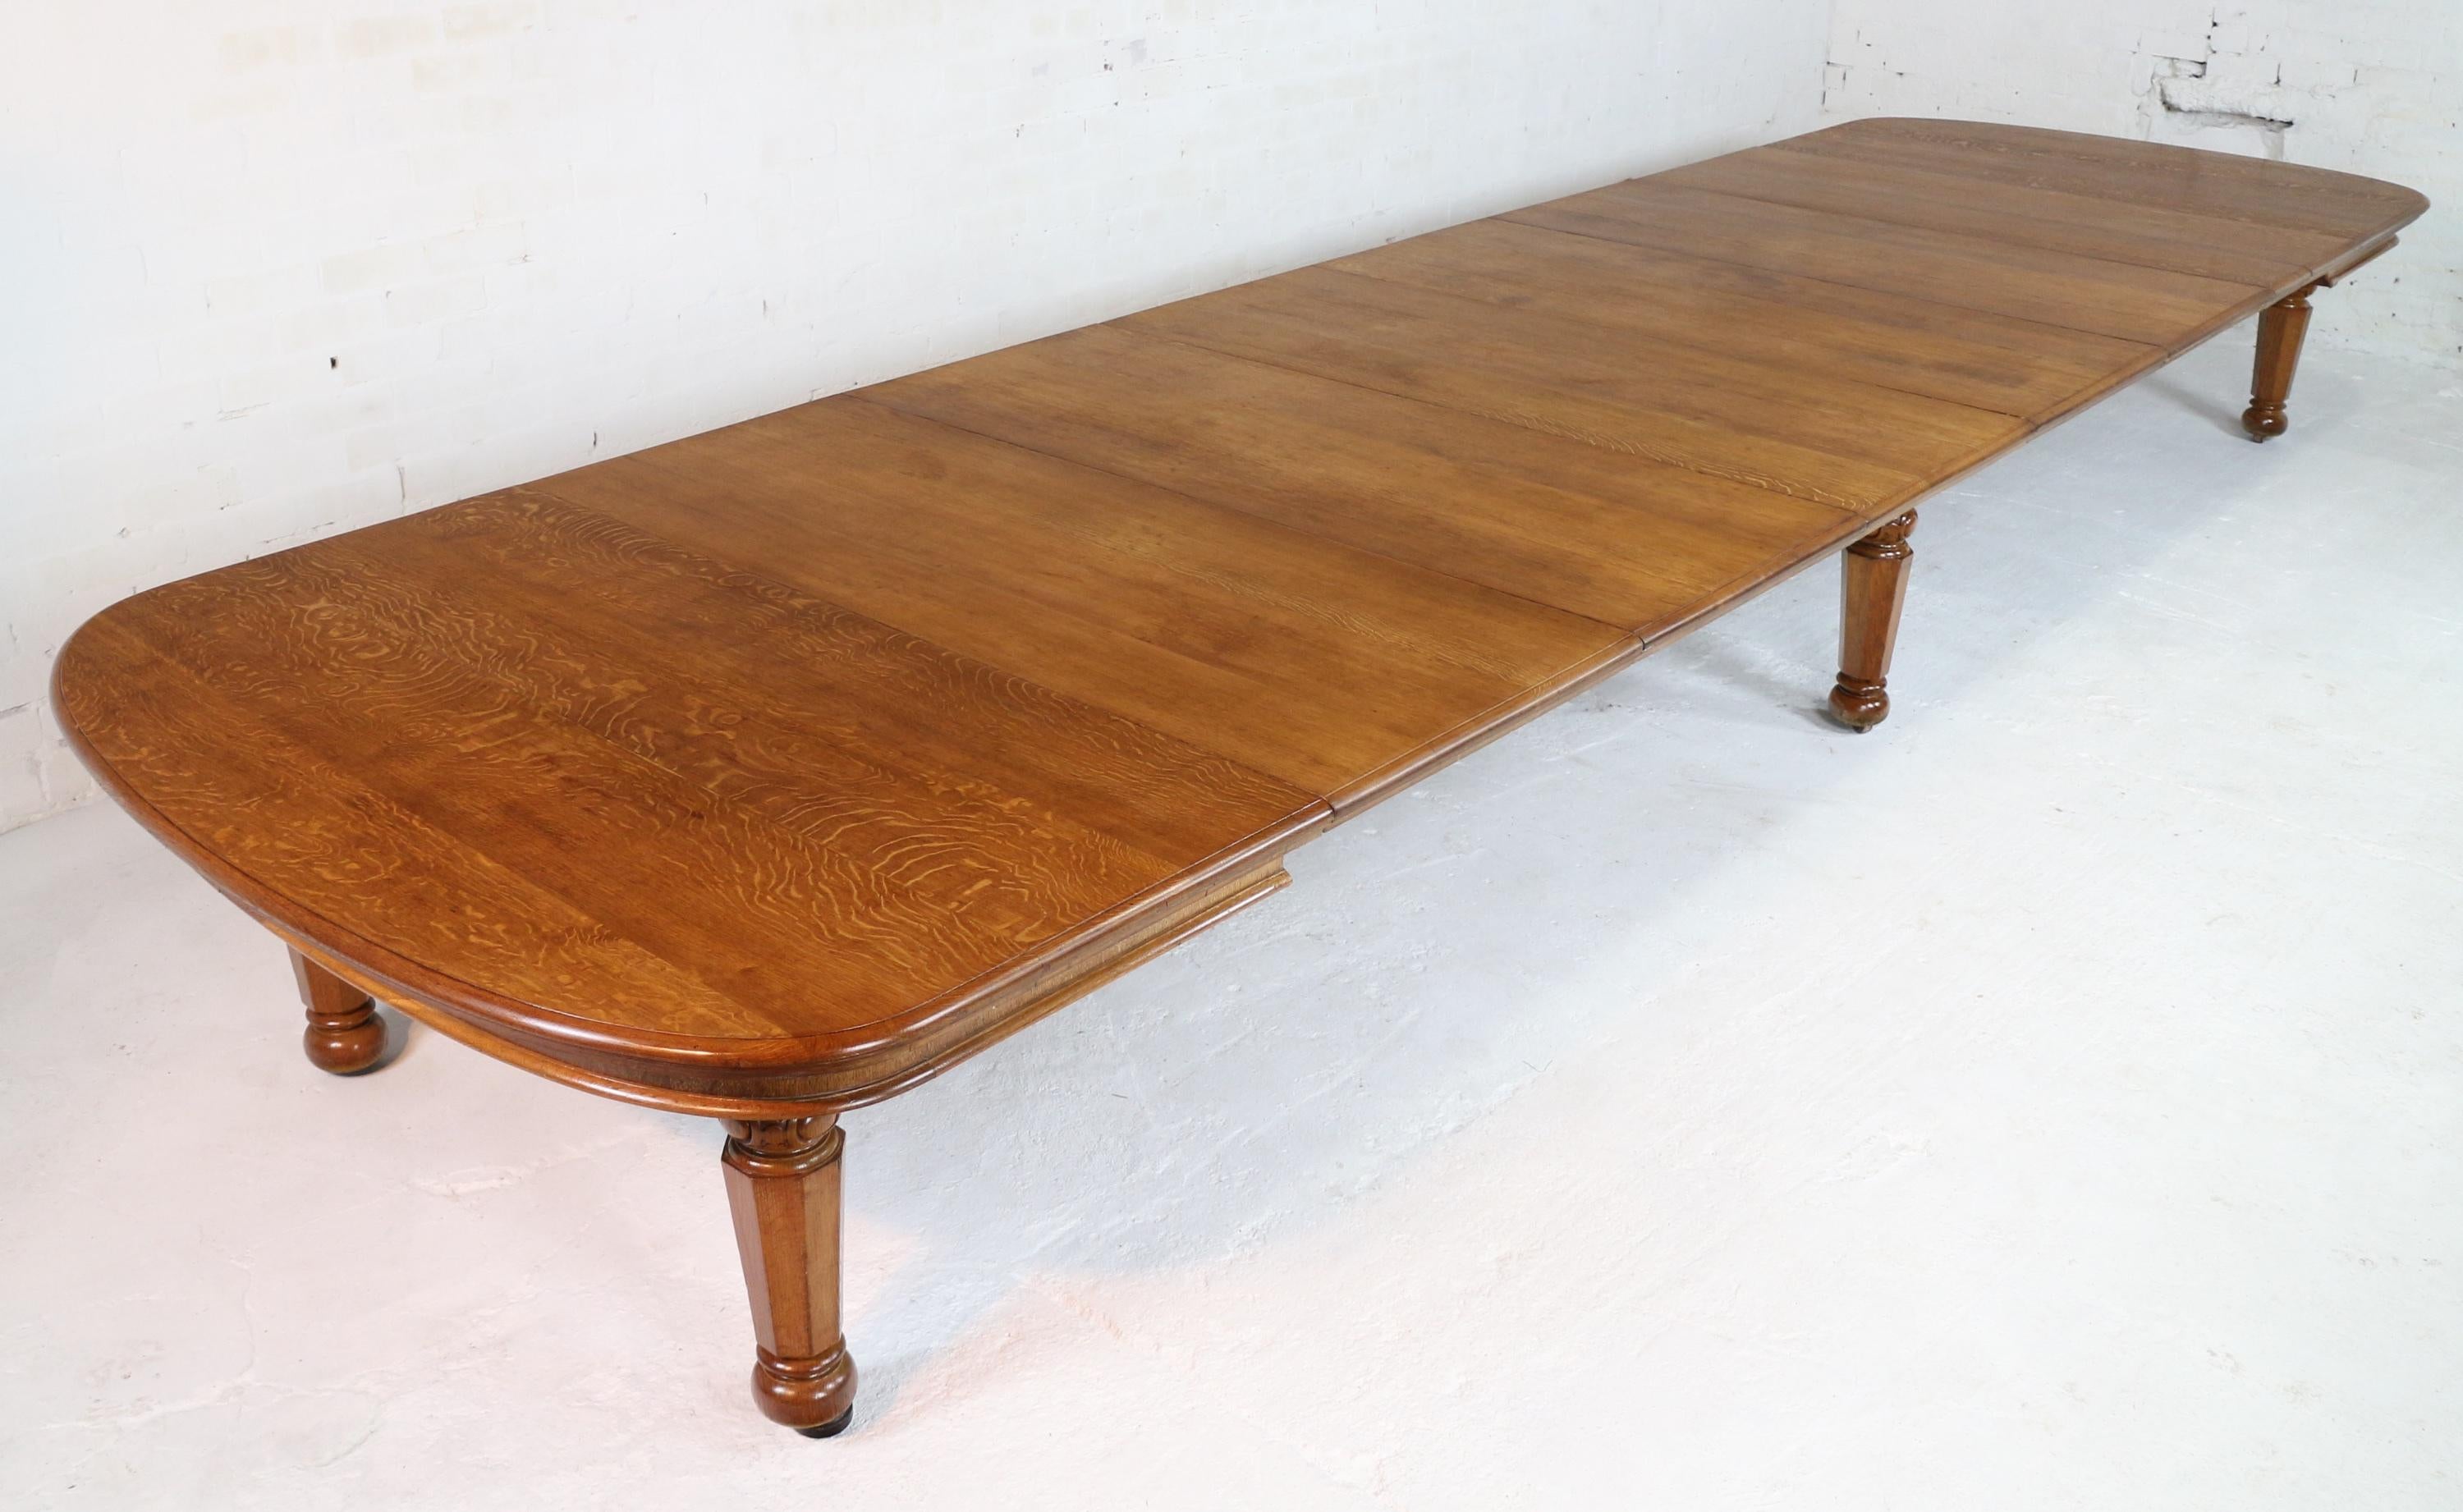 An exceptional extra wide early Victorian extending dining table in golden quarter-sawn oak and with seven leaves. Dating to circa 1840 and attributed to Gillows this unusually large 67 3/4in wide table smoothly extends from 6ft 5in to 20ft using a